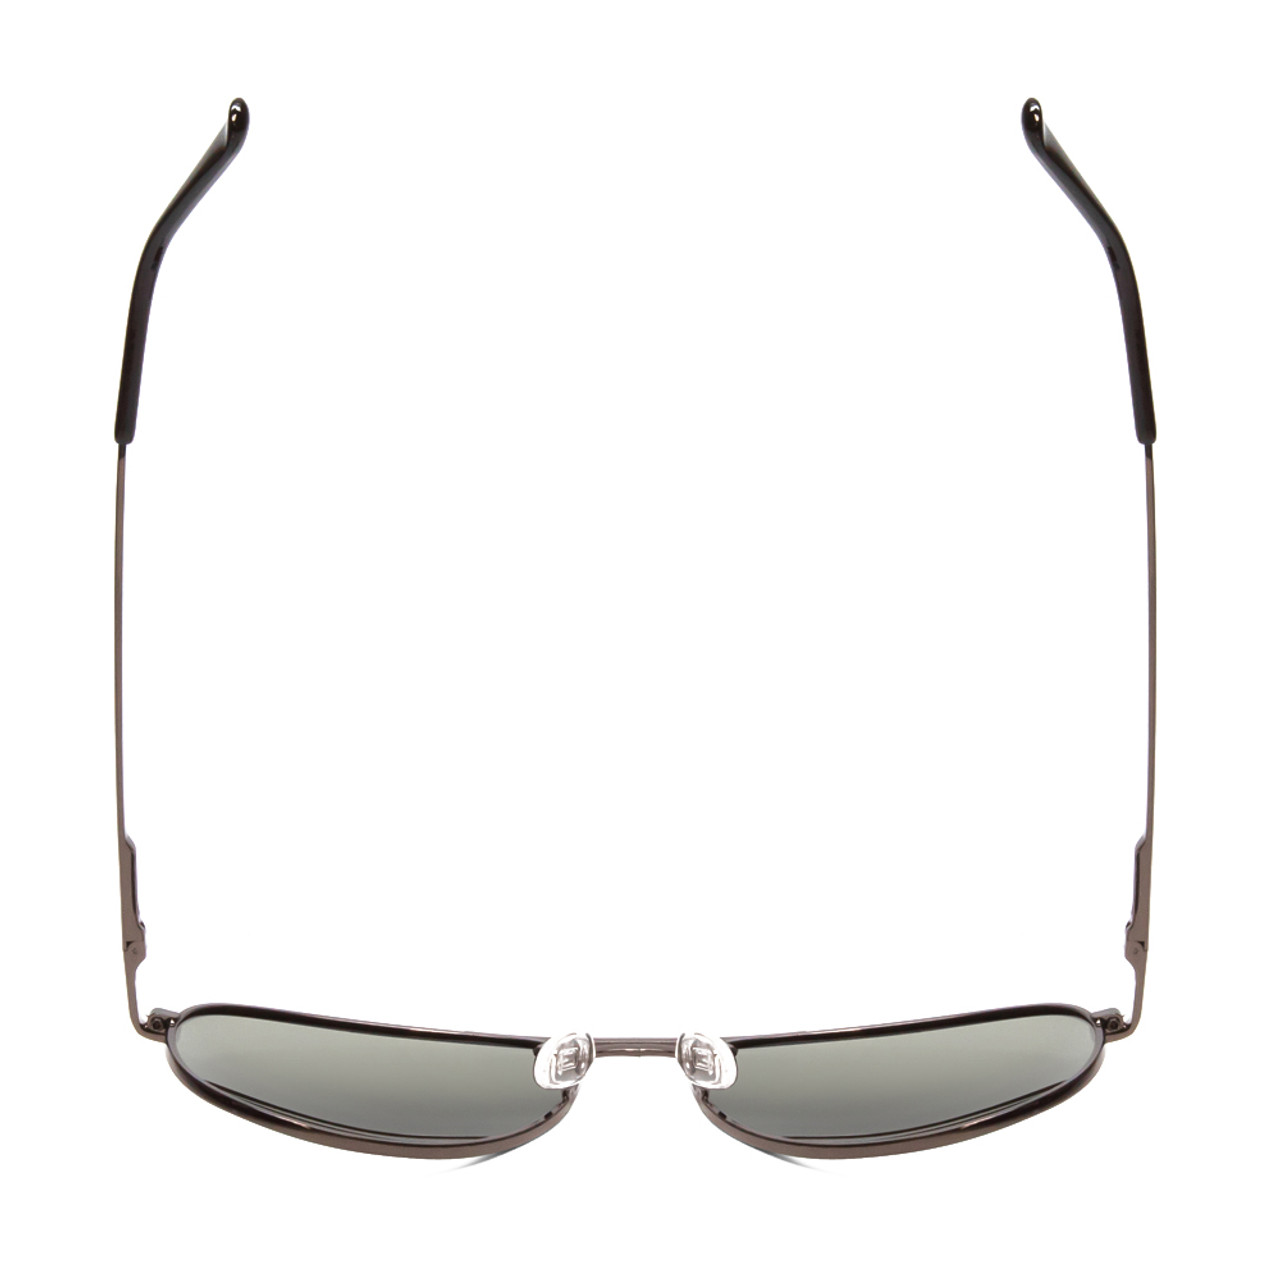 Top View of Coyote Classic II Unisex Metal Aviator Polarized Sunglasses in Silver & G15 55mm